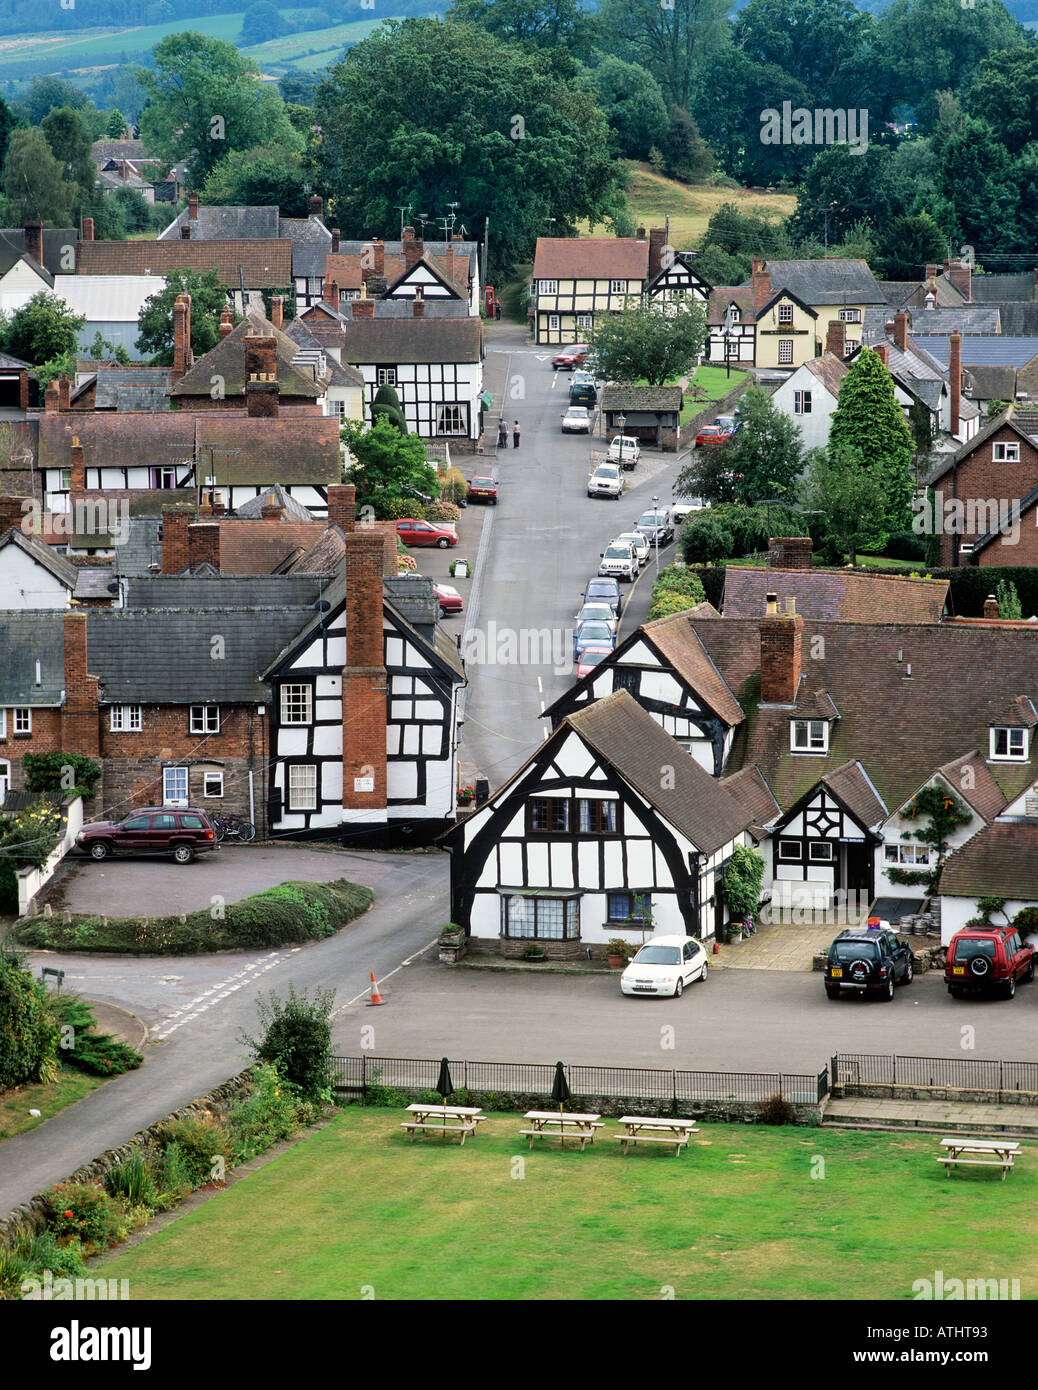 Half timbered houses with crucks in the Herefordshire village of Weobley Stock Photo